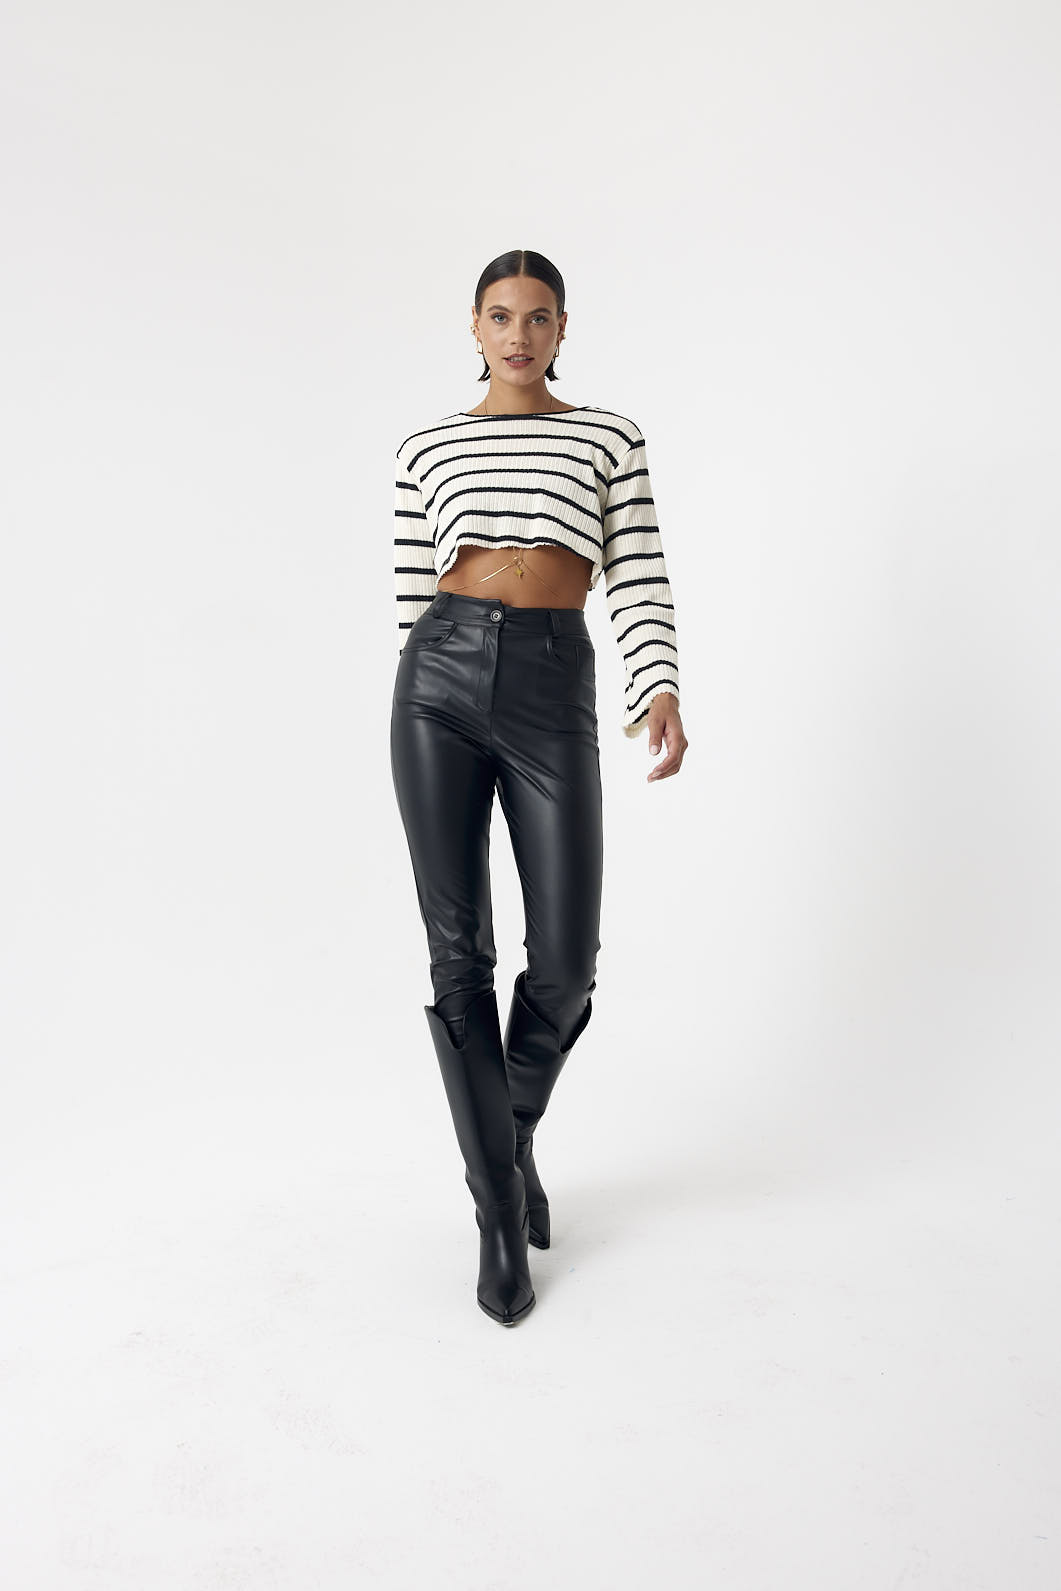 A wholesale clothing model wears Knitwear Crop Top - Anthracite & Cream, Turkish wholesale Crop Top of Cream Rouge